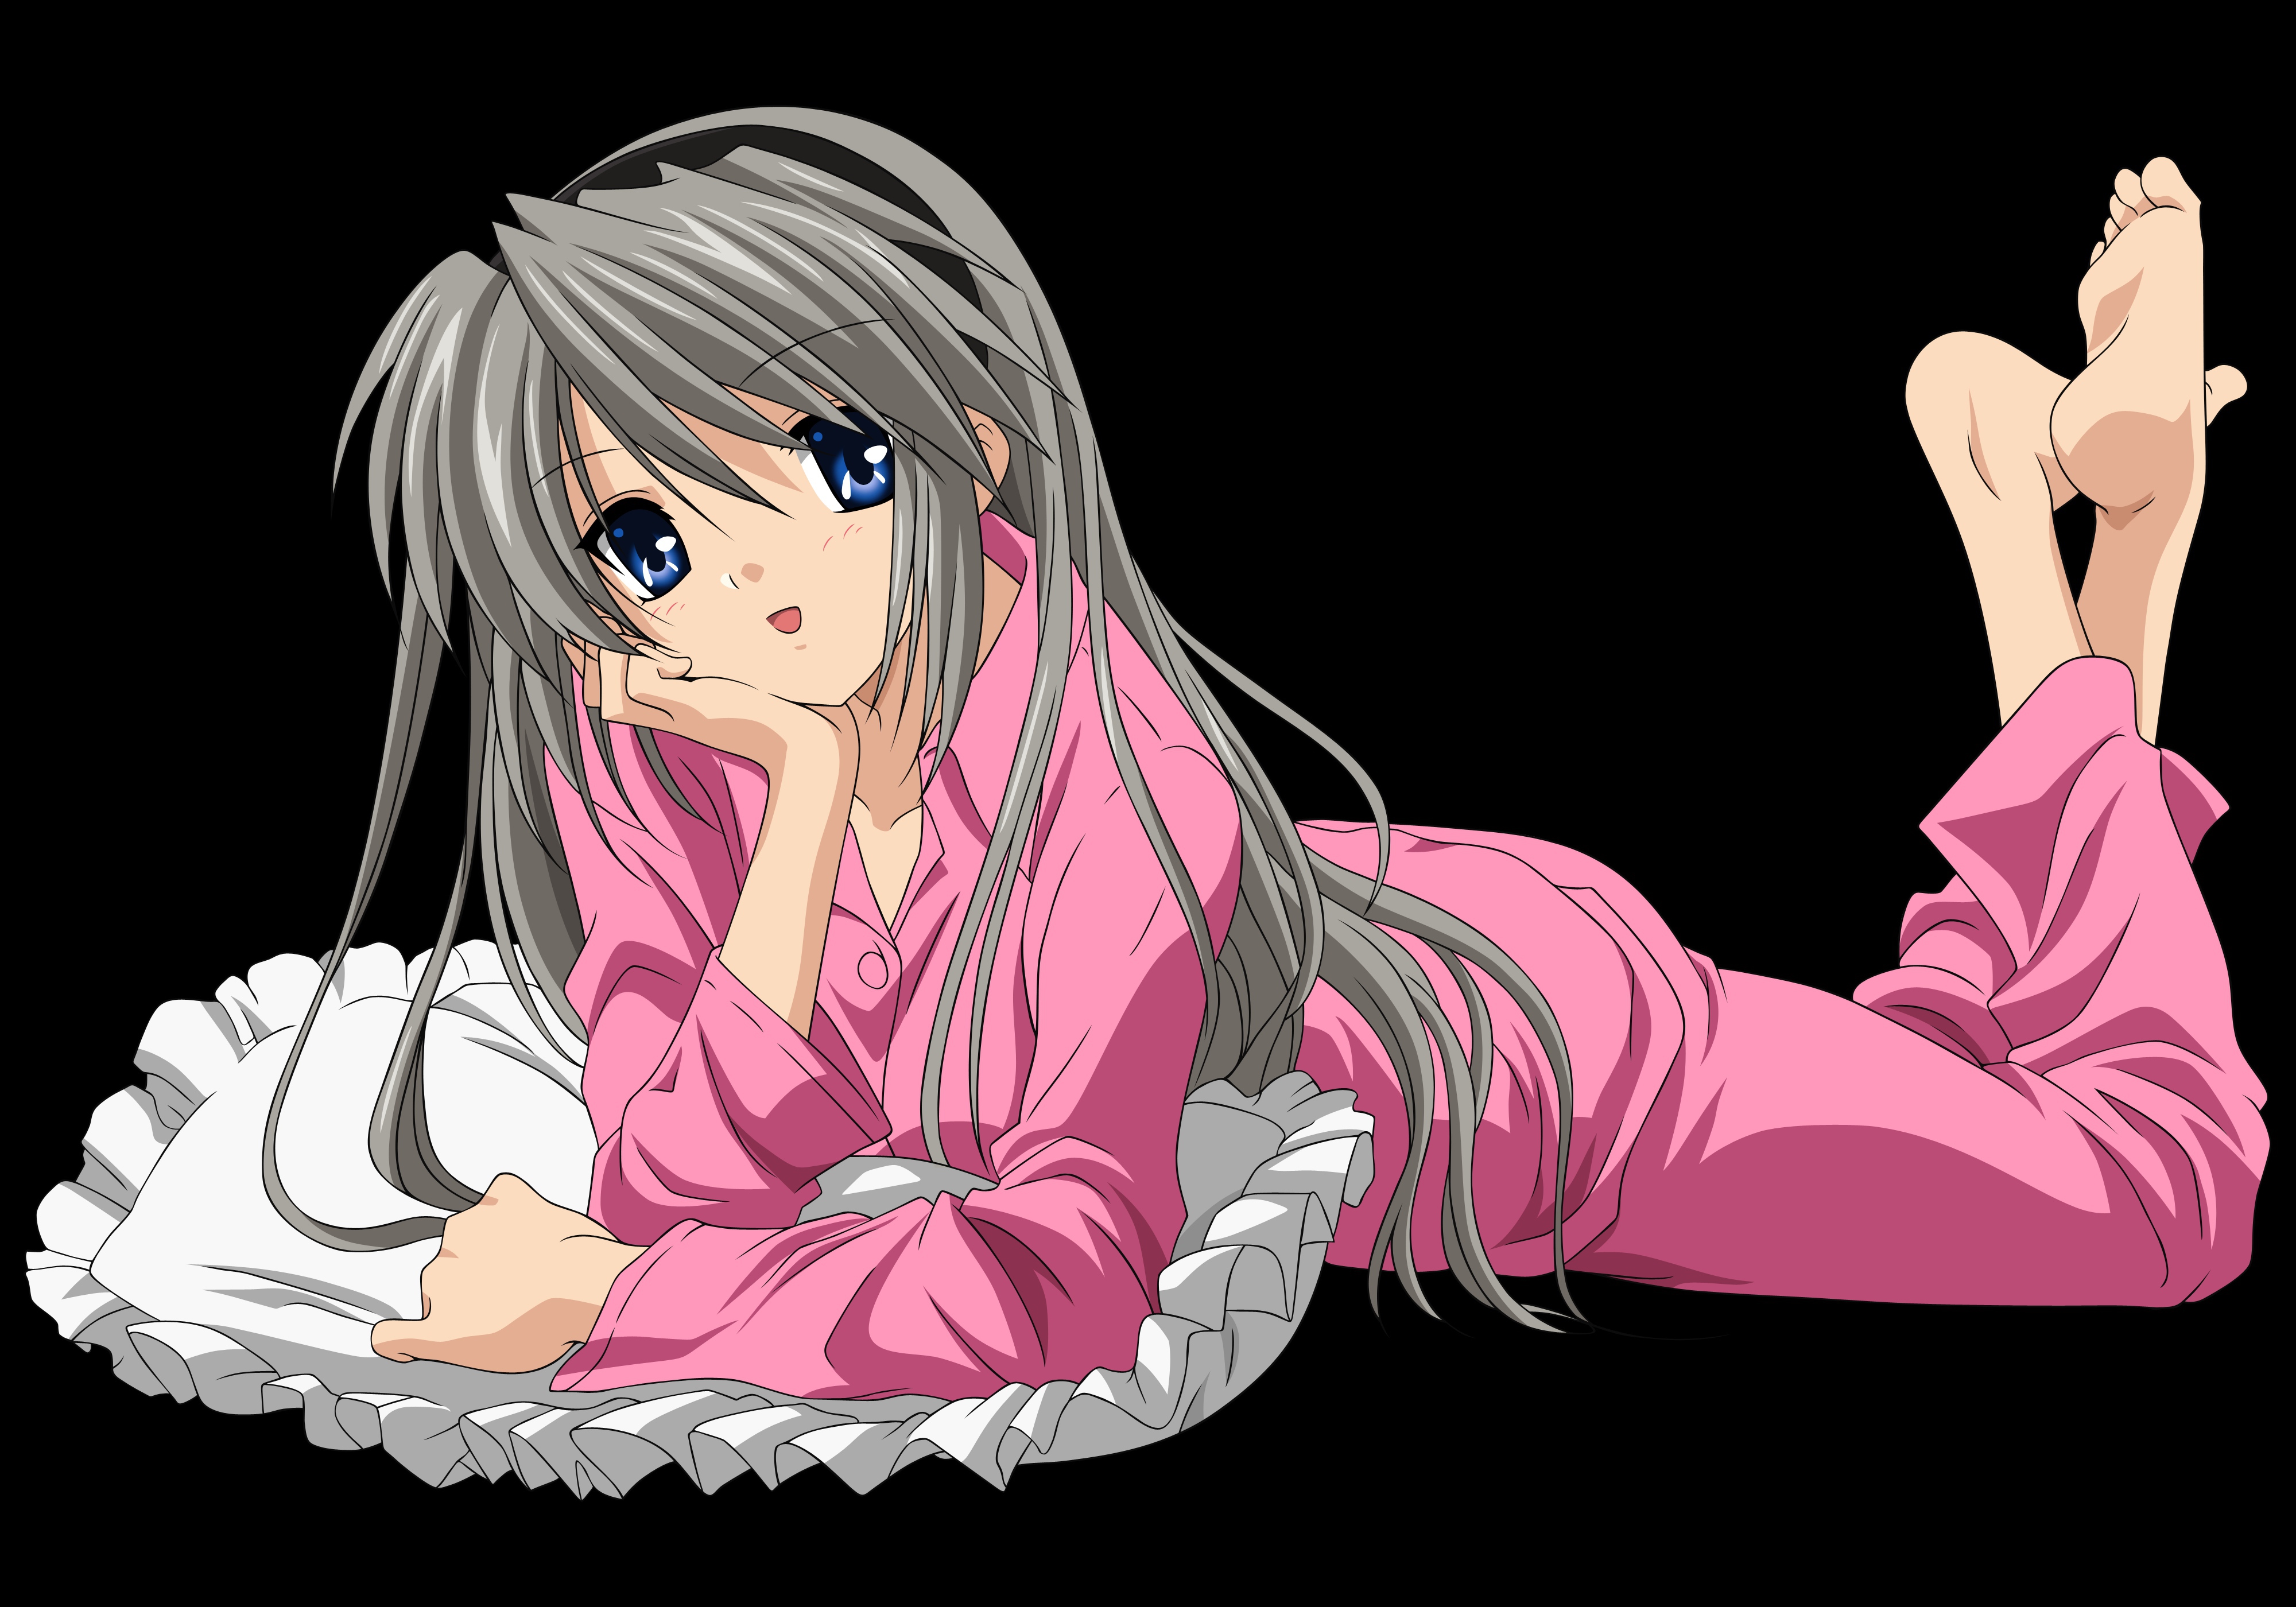 Anime Girl On A Bed Wallpapers And Images Wallpapers Pictures Photos 